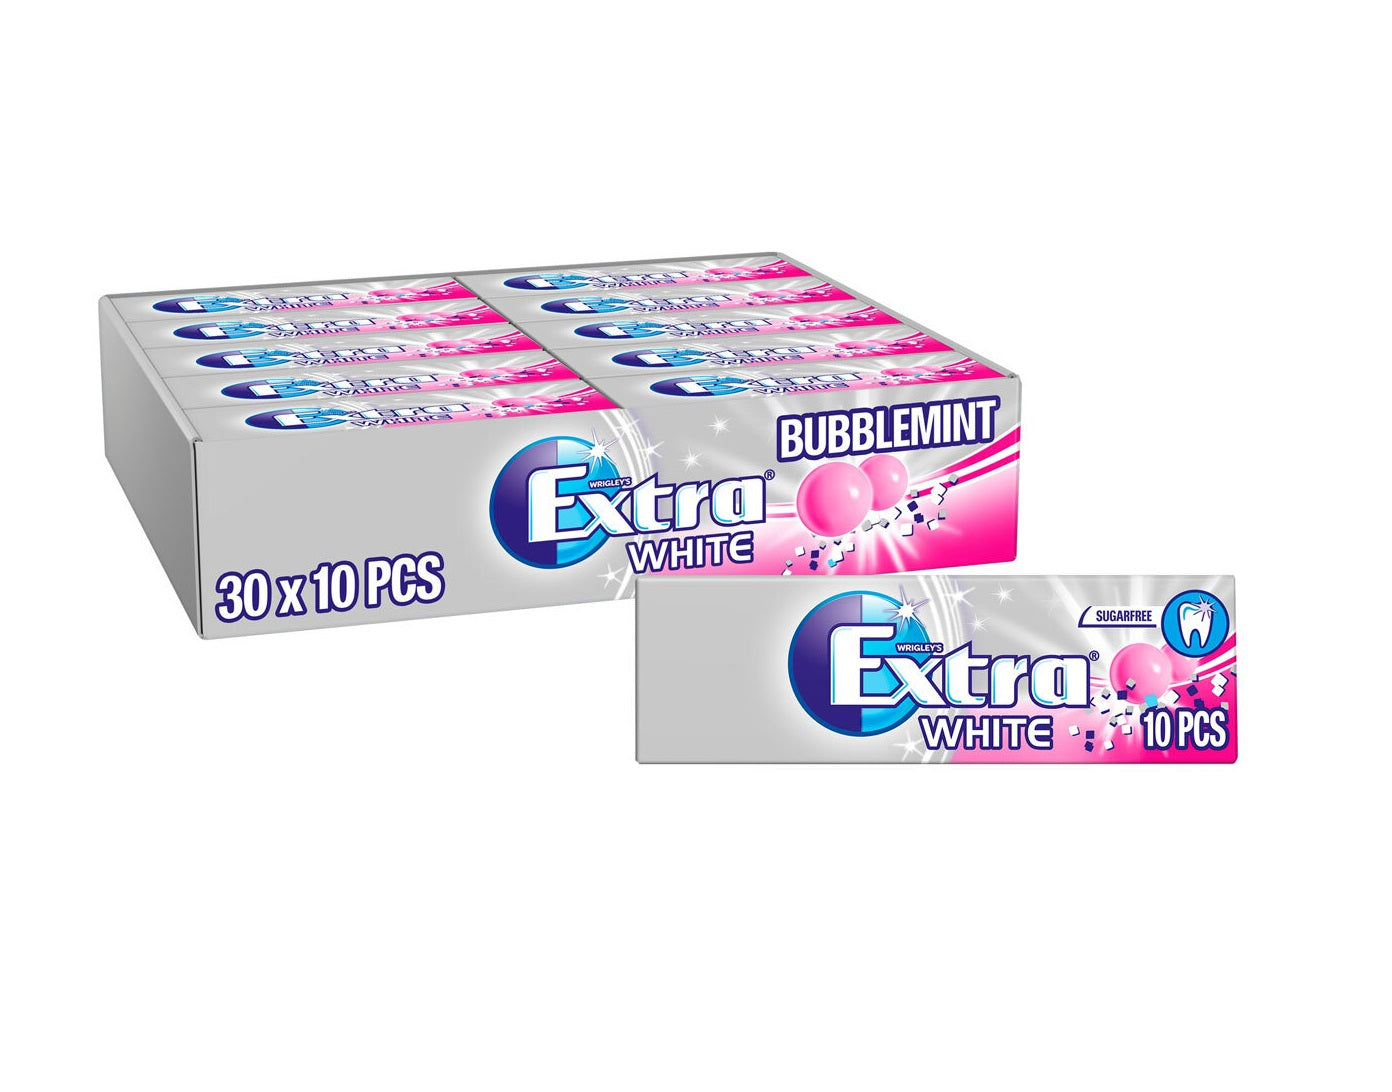 Wrigley's Extra Spearmint Chewing Gum 30 x 10 Pack – Herbs&Beans